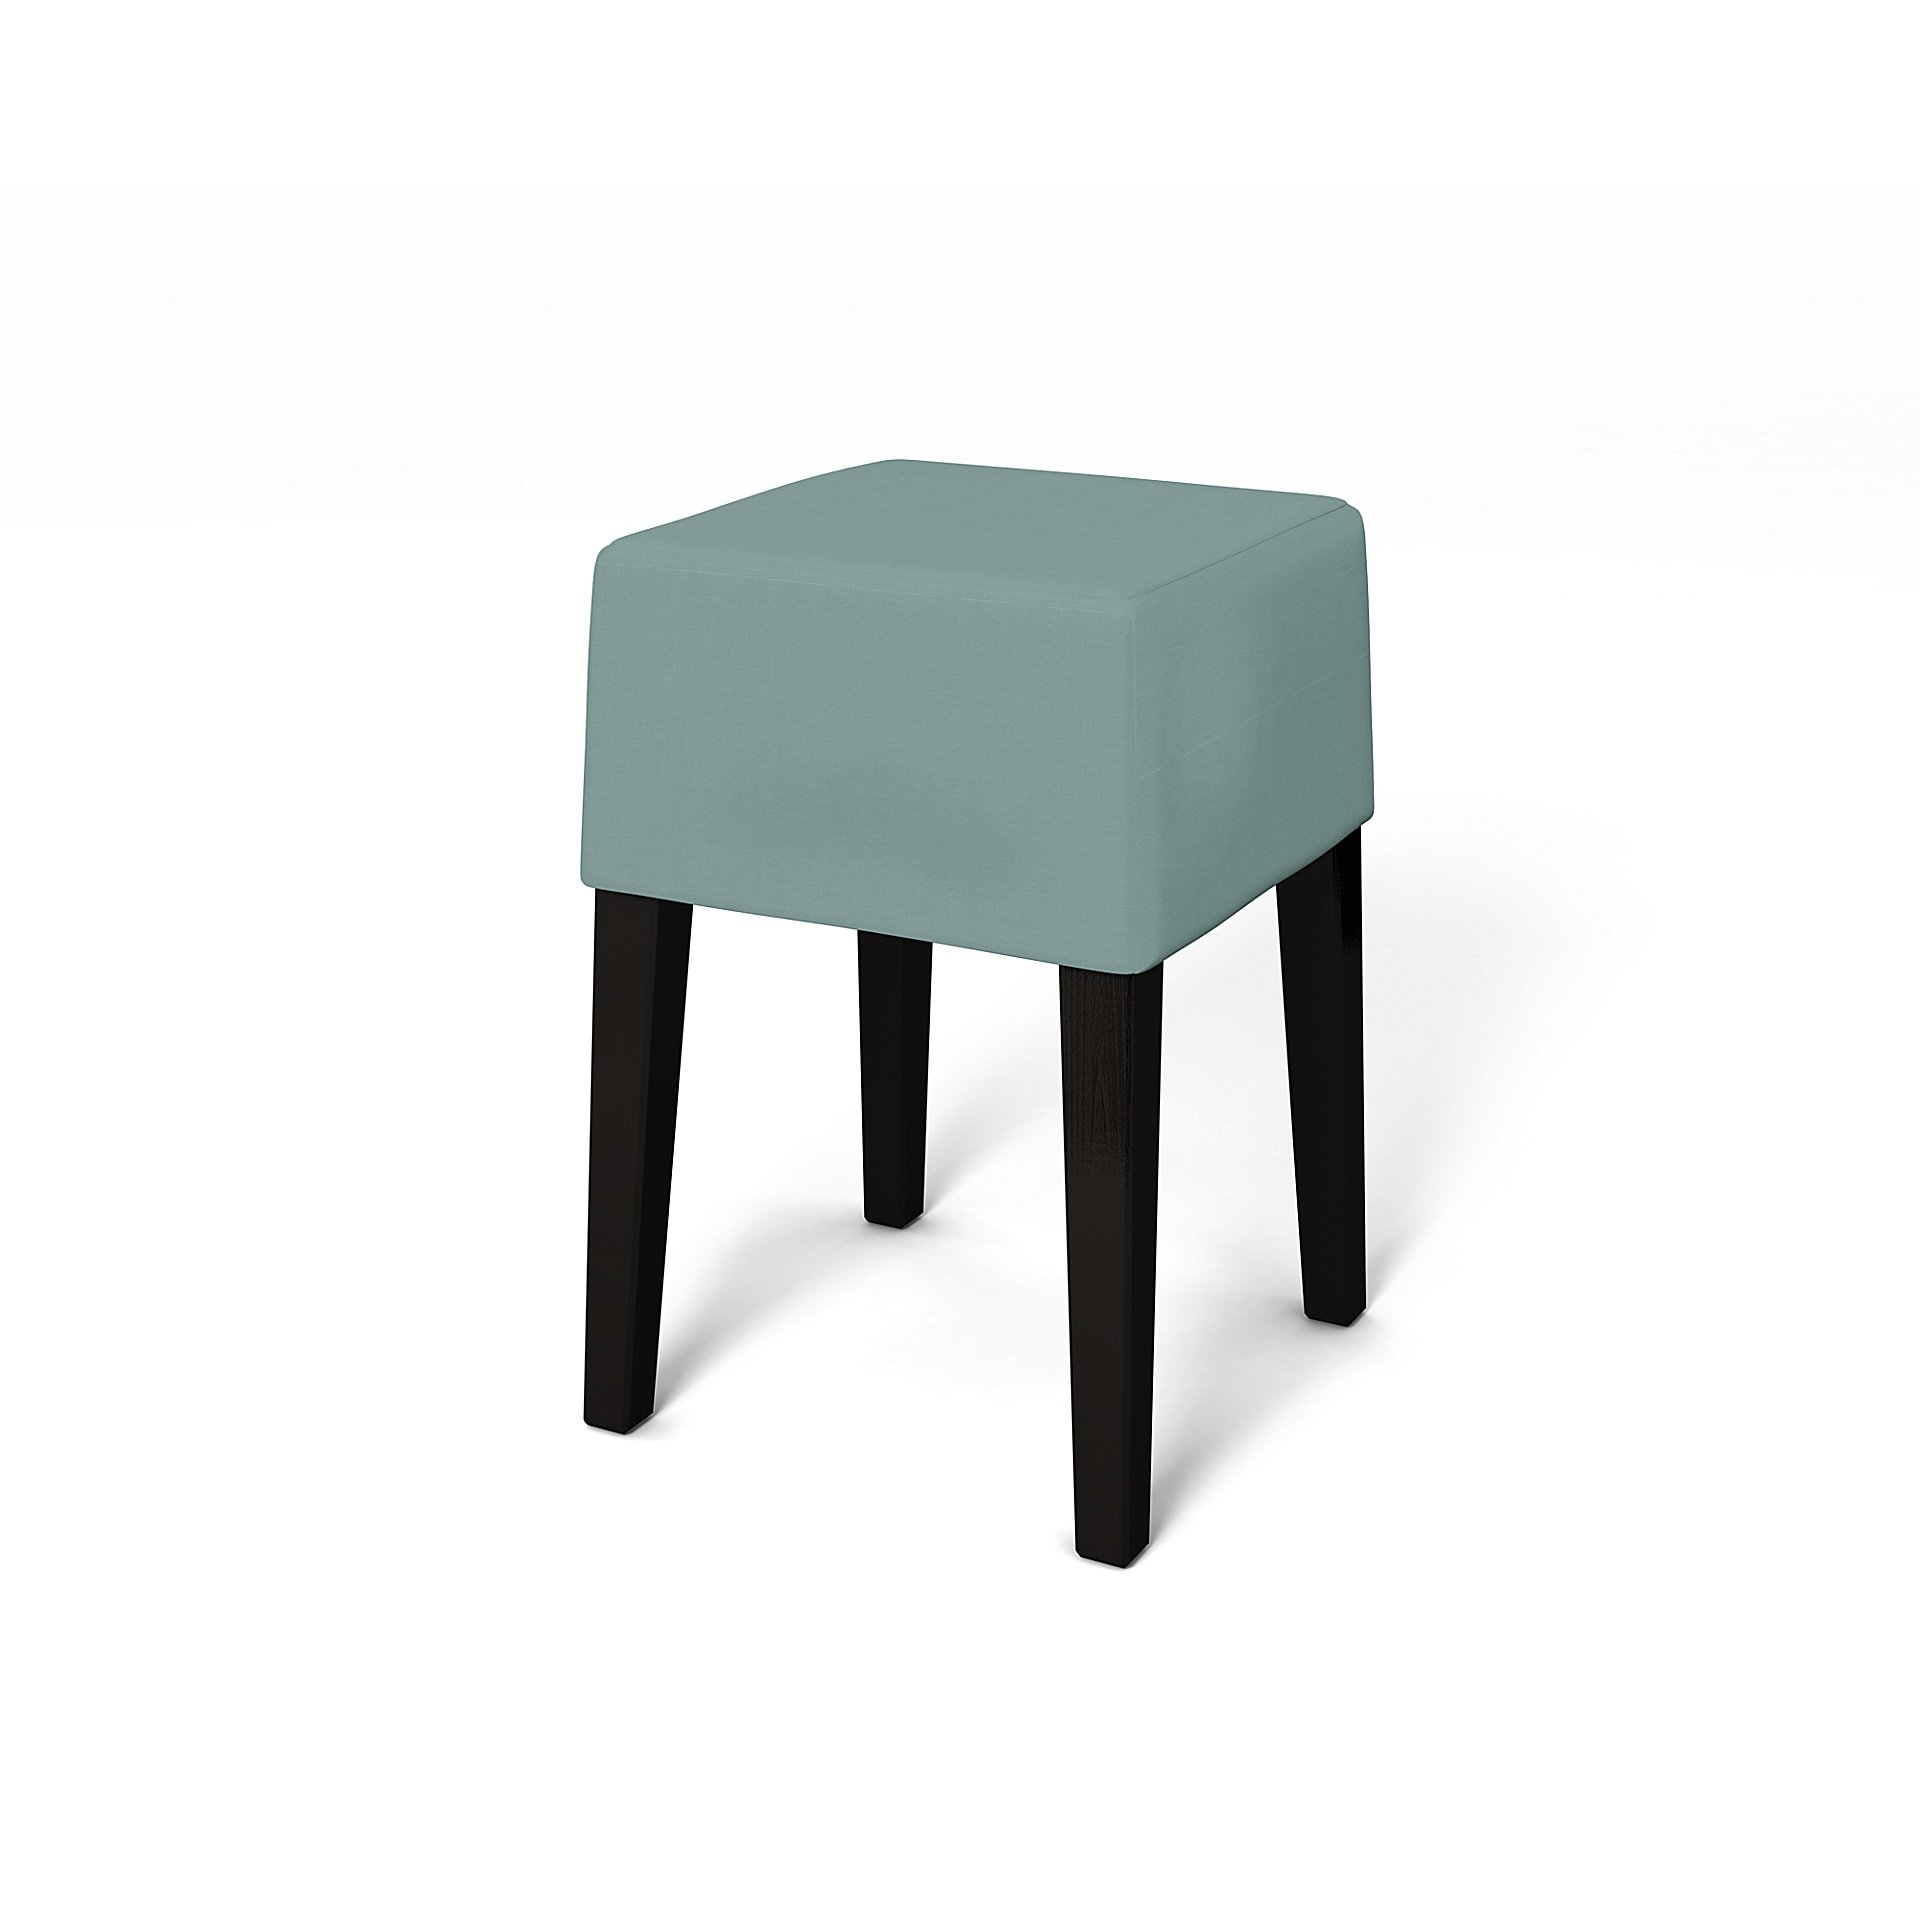 IKEA - Nils Stool Cover, Mineral Blue, Cotton - Bemz